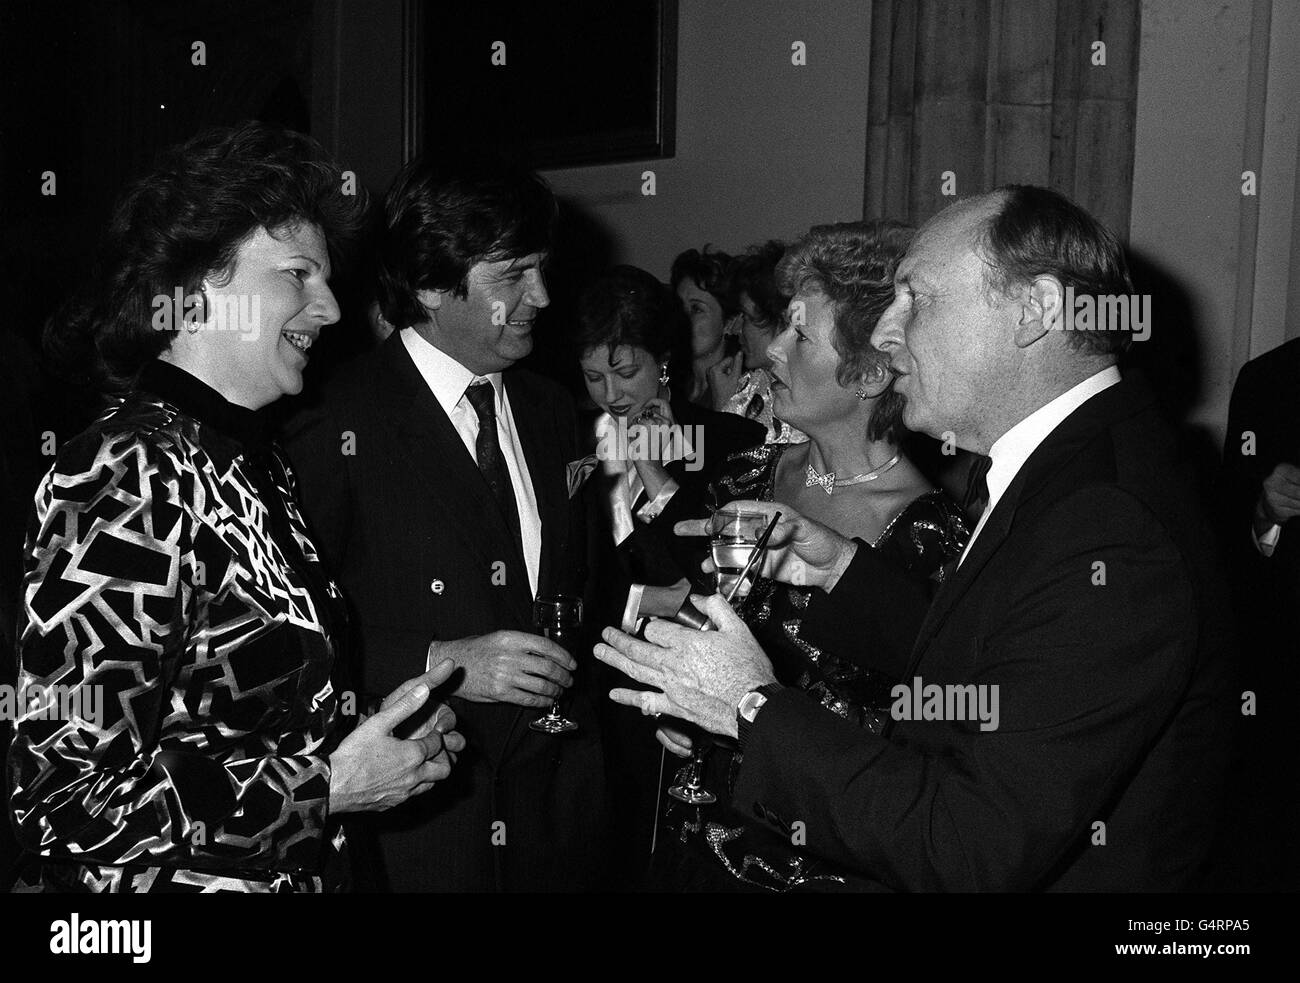 Labour leader Neil Kinnock (right) and his wife Glenys chat to TV presenter Melvyn Bragg and Tory MP Emma Nicholson (left), wife of Booker McConnell chairman Michael Caine, at the Booker Prize dinner at London's Guildhall. * The winner was Penelope Lively, author of Moon Tiger. Stock Photo